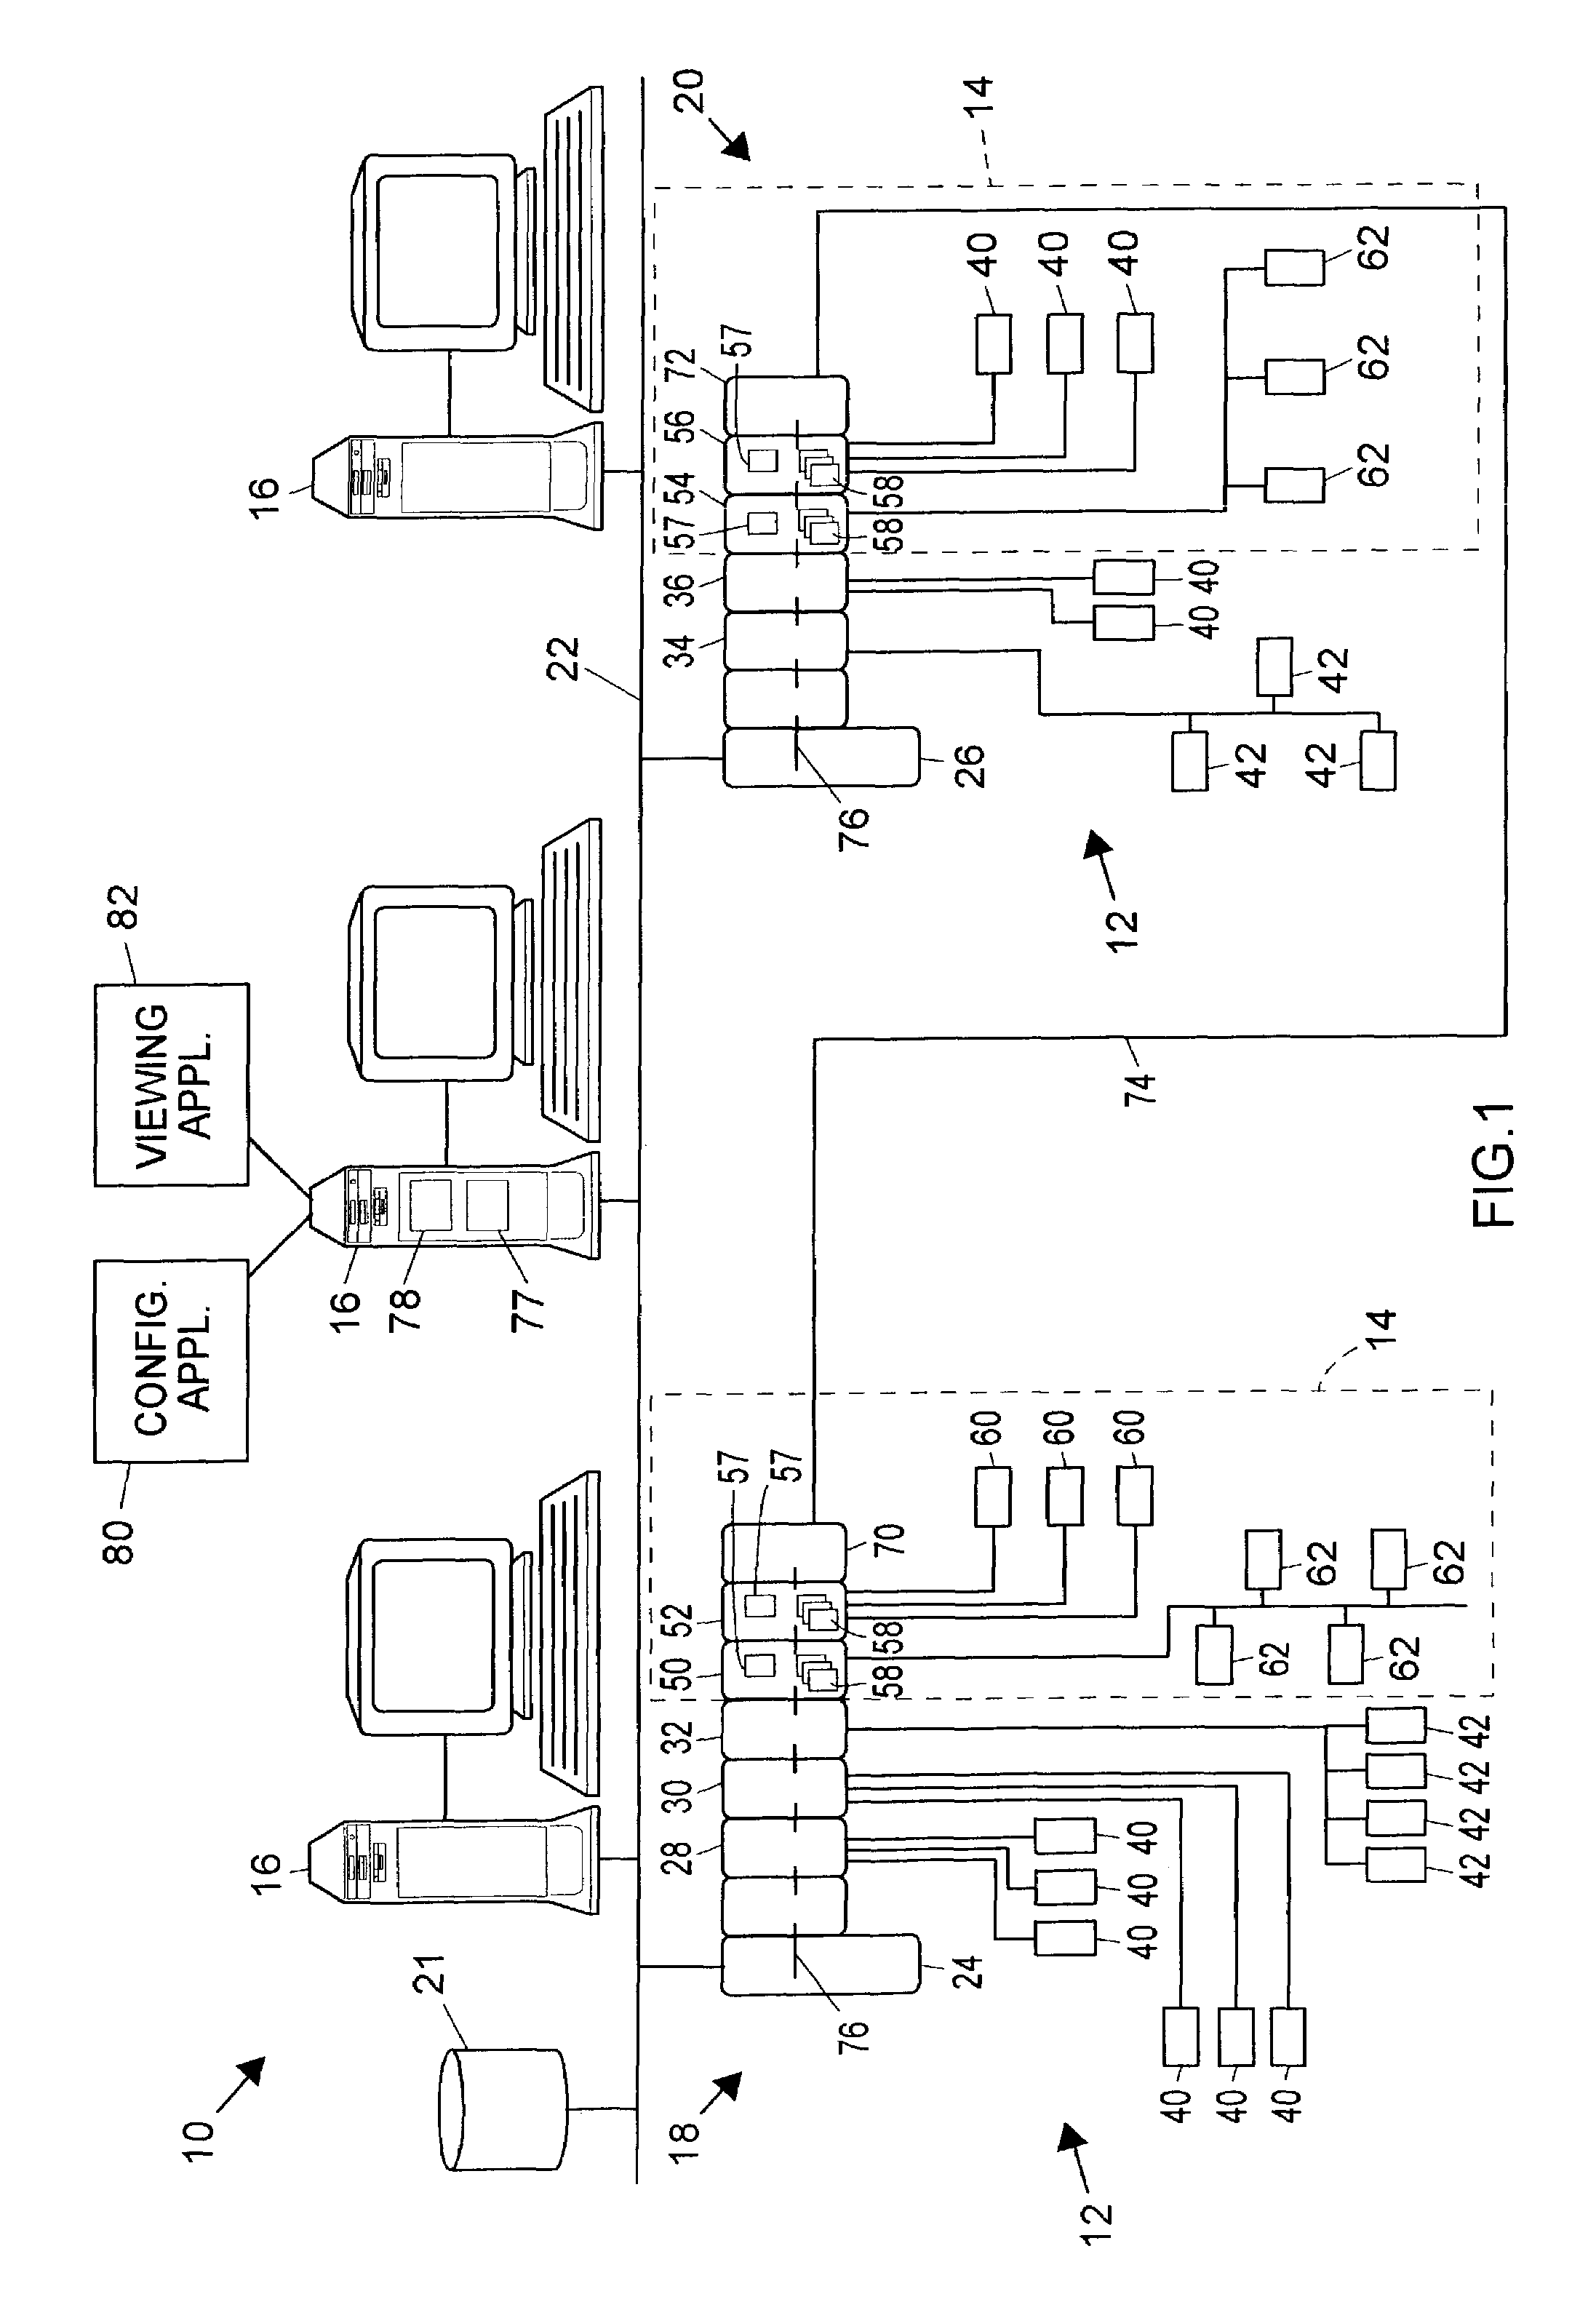 Process control system with an embedded safety system